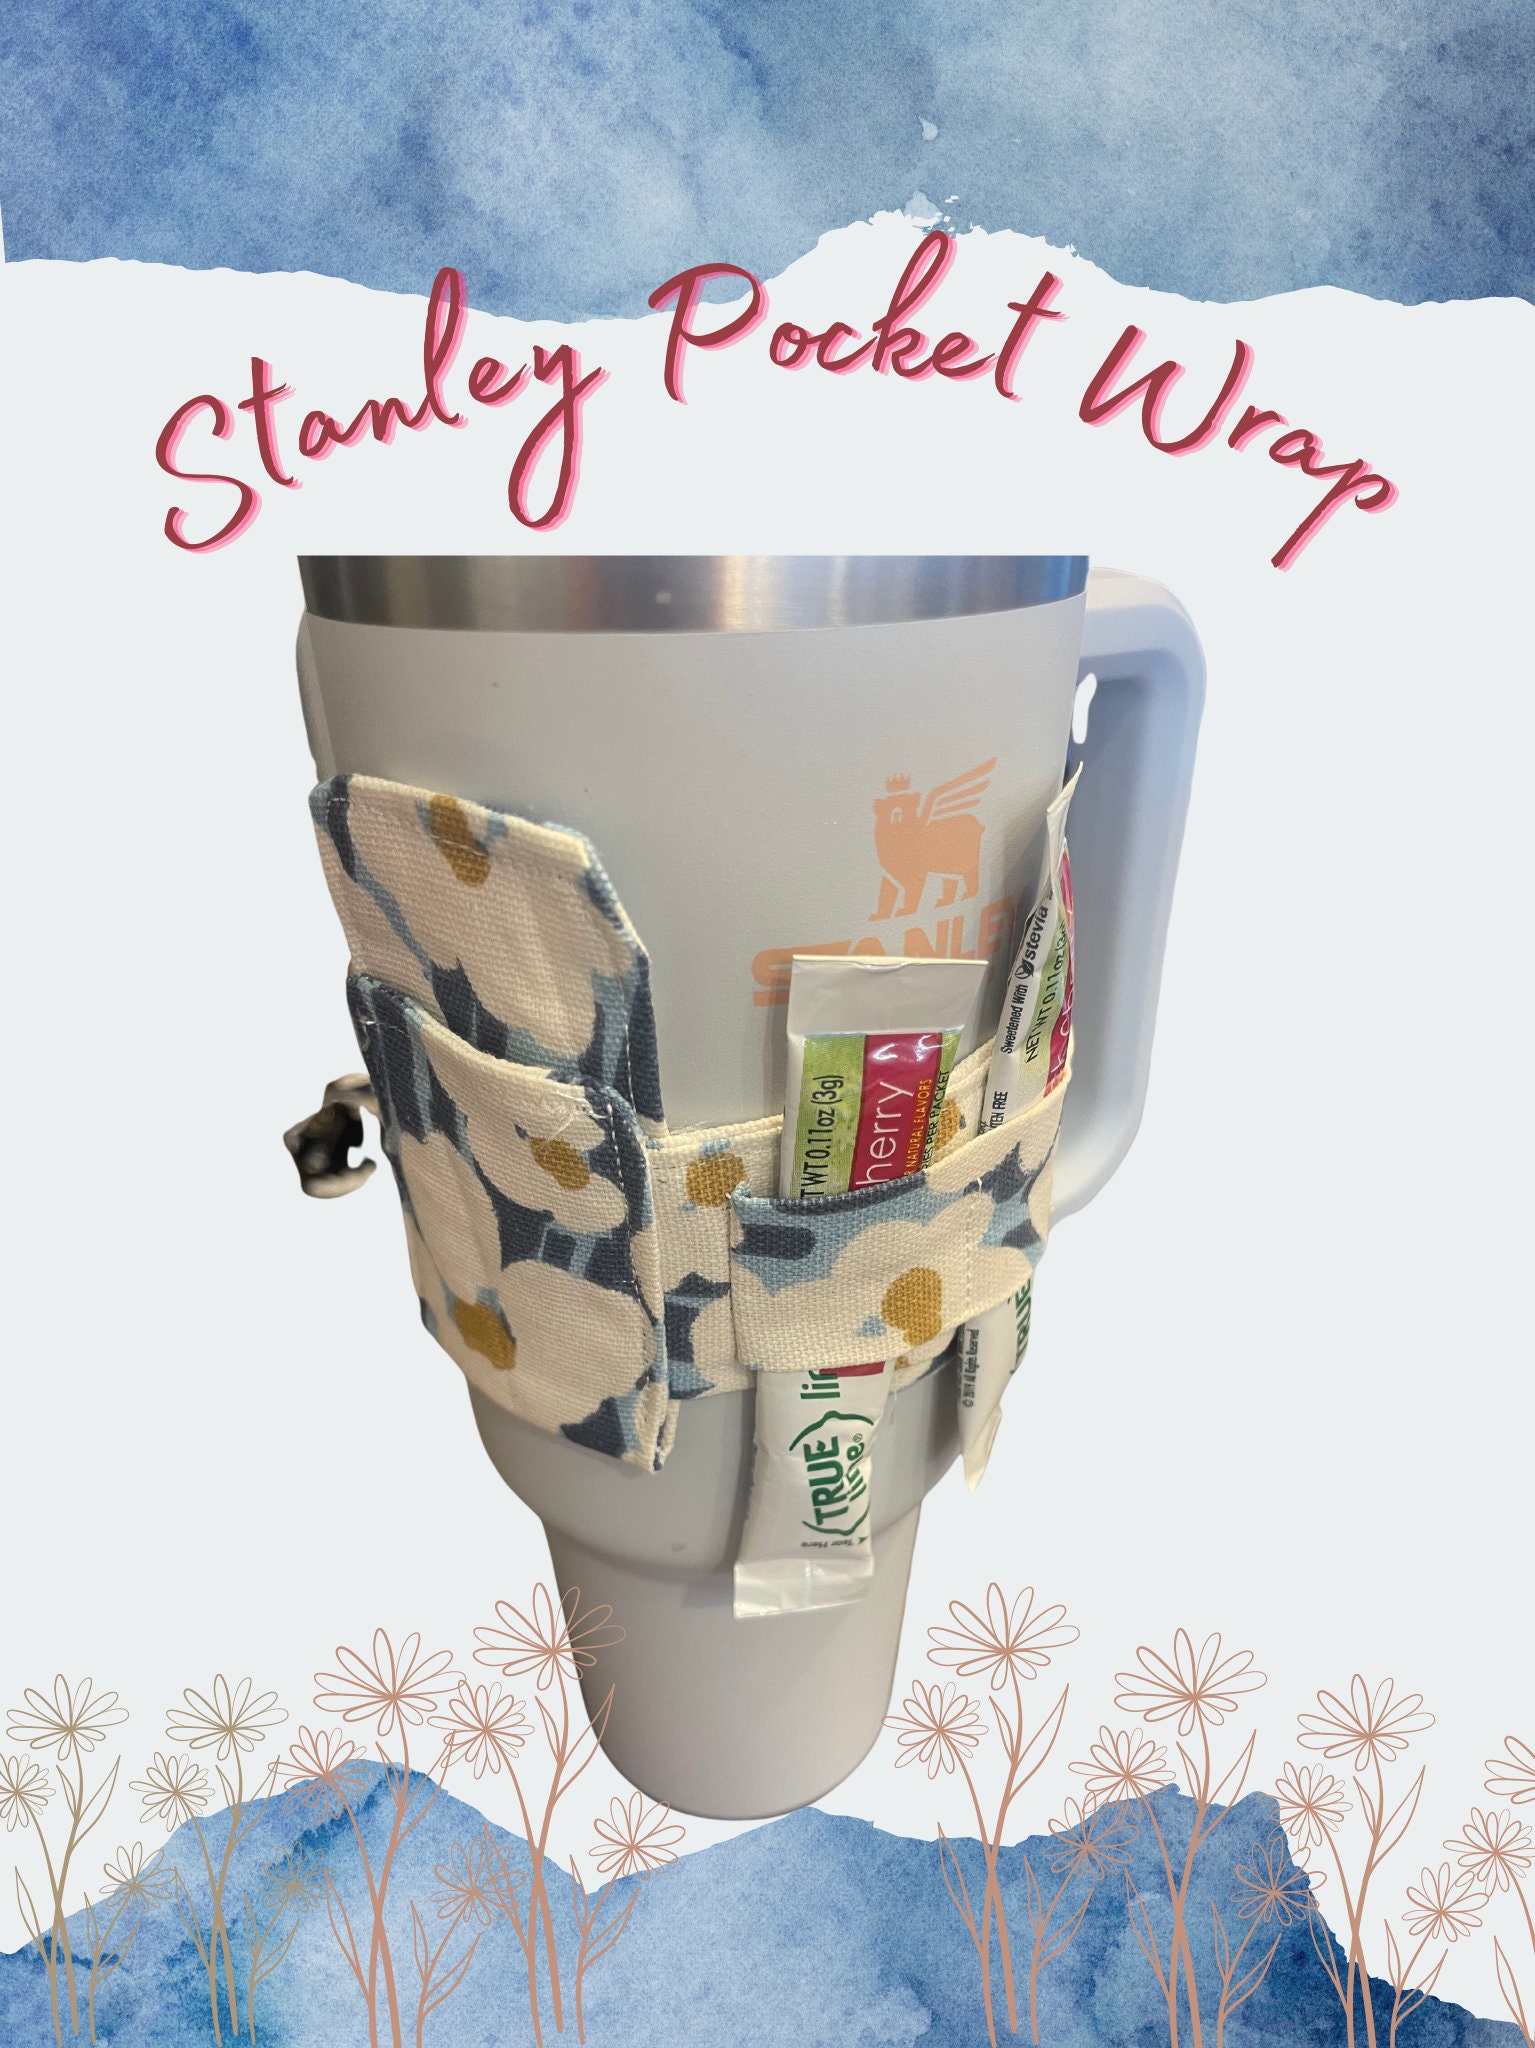 Stanley chapstick holder! Never lose your chapstick again! #stanleyque